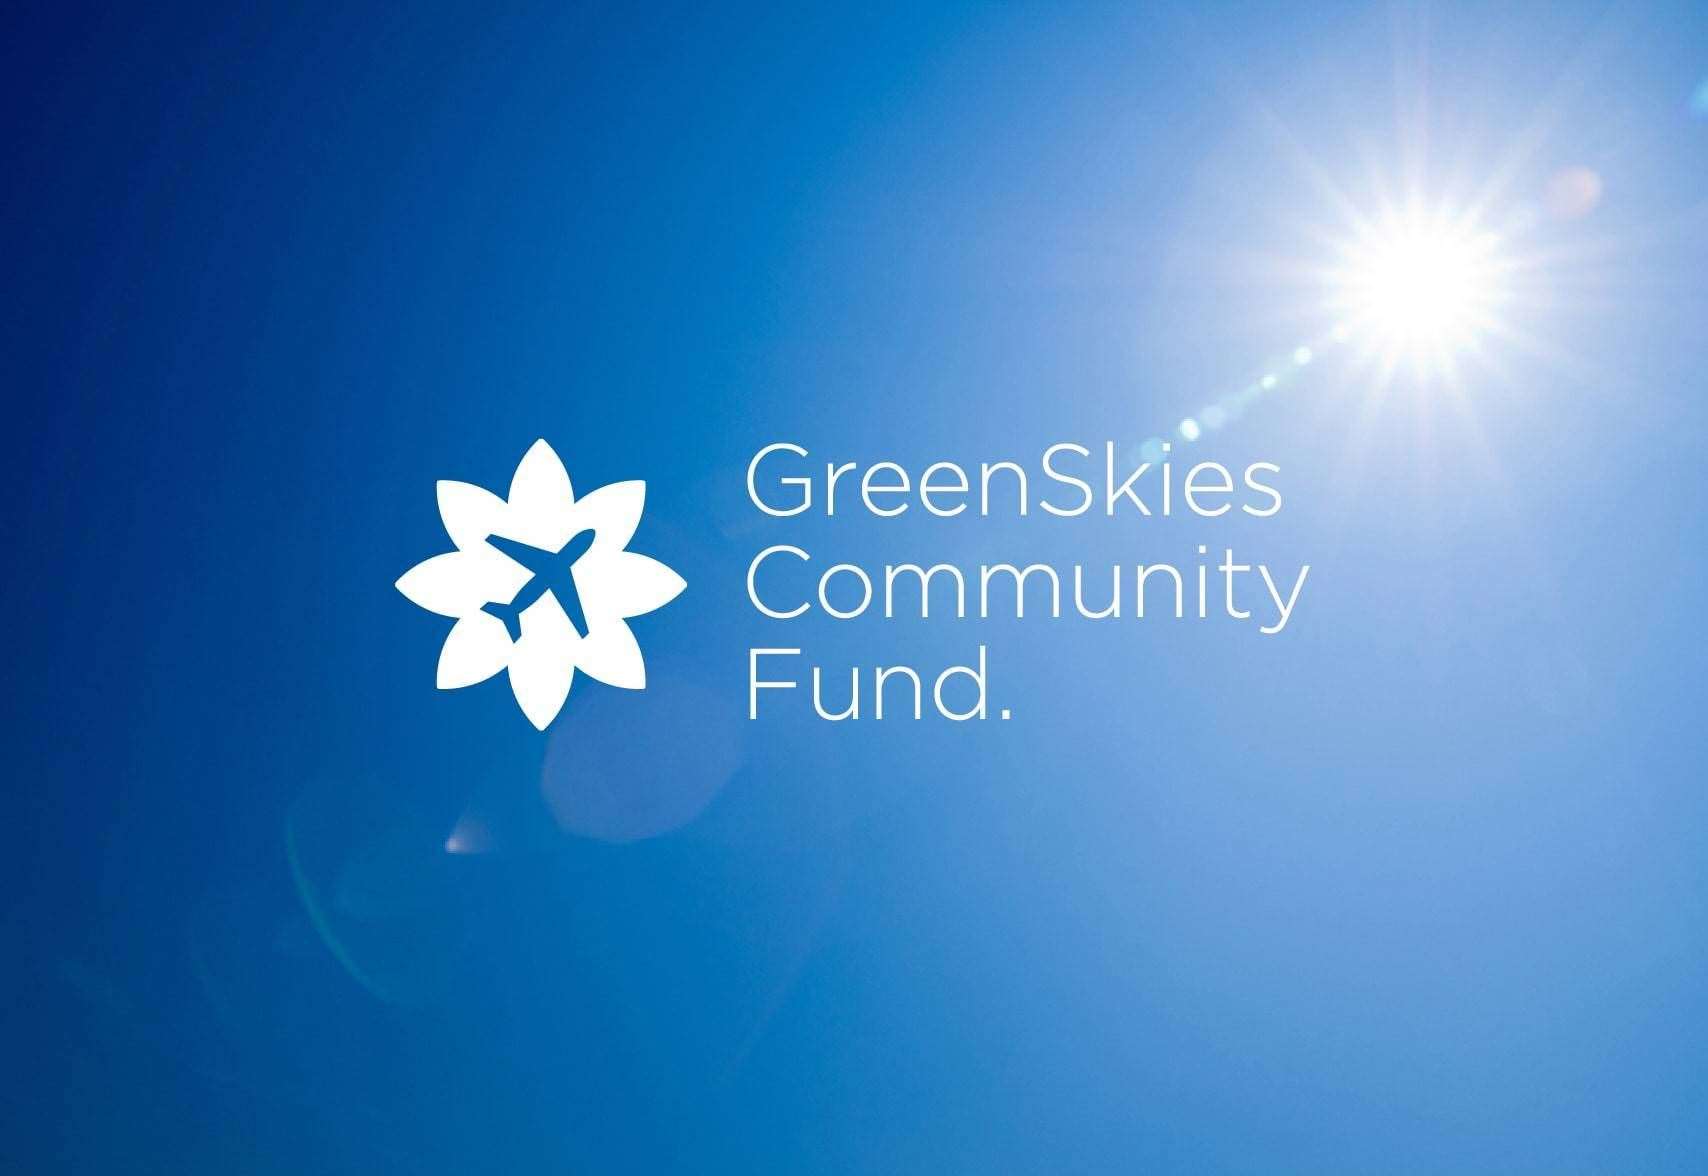 Loganair is accepting applications from projects in round two of its GreenSkies Community Fund.